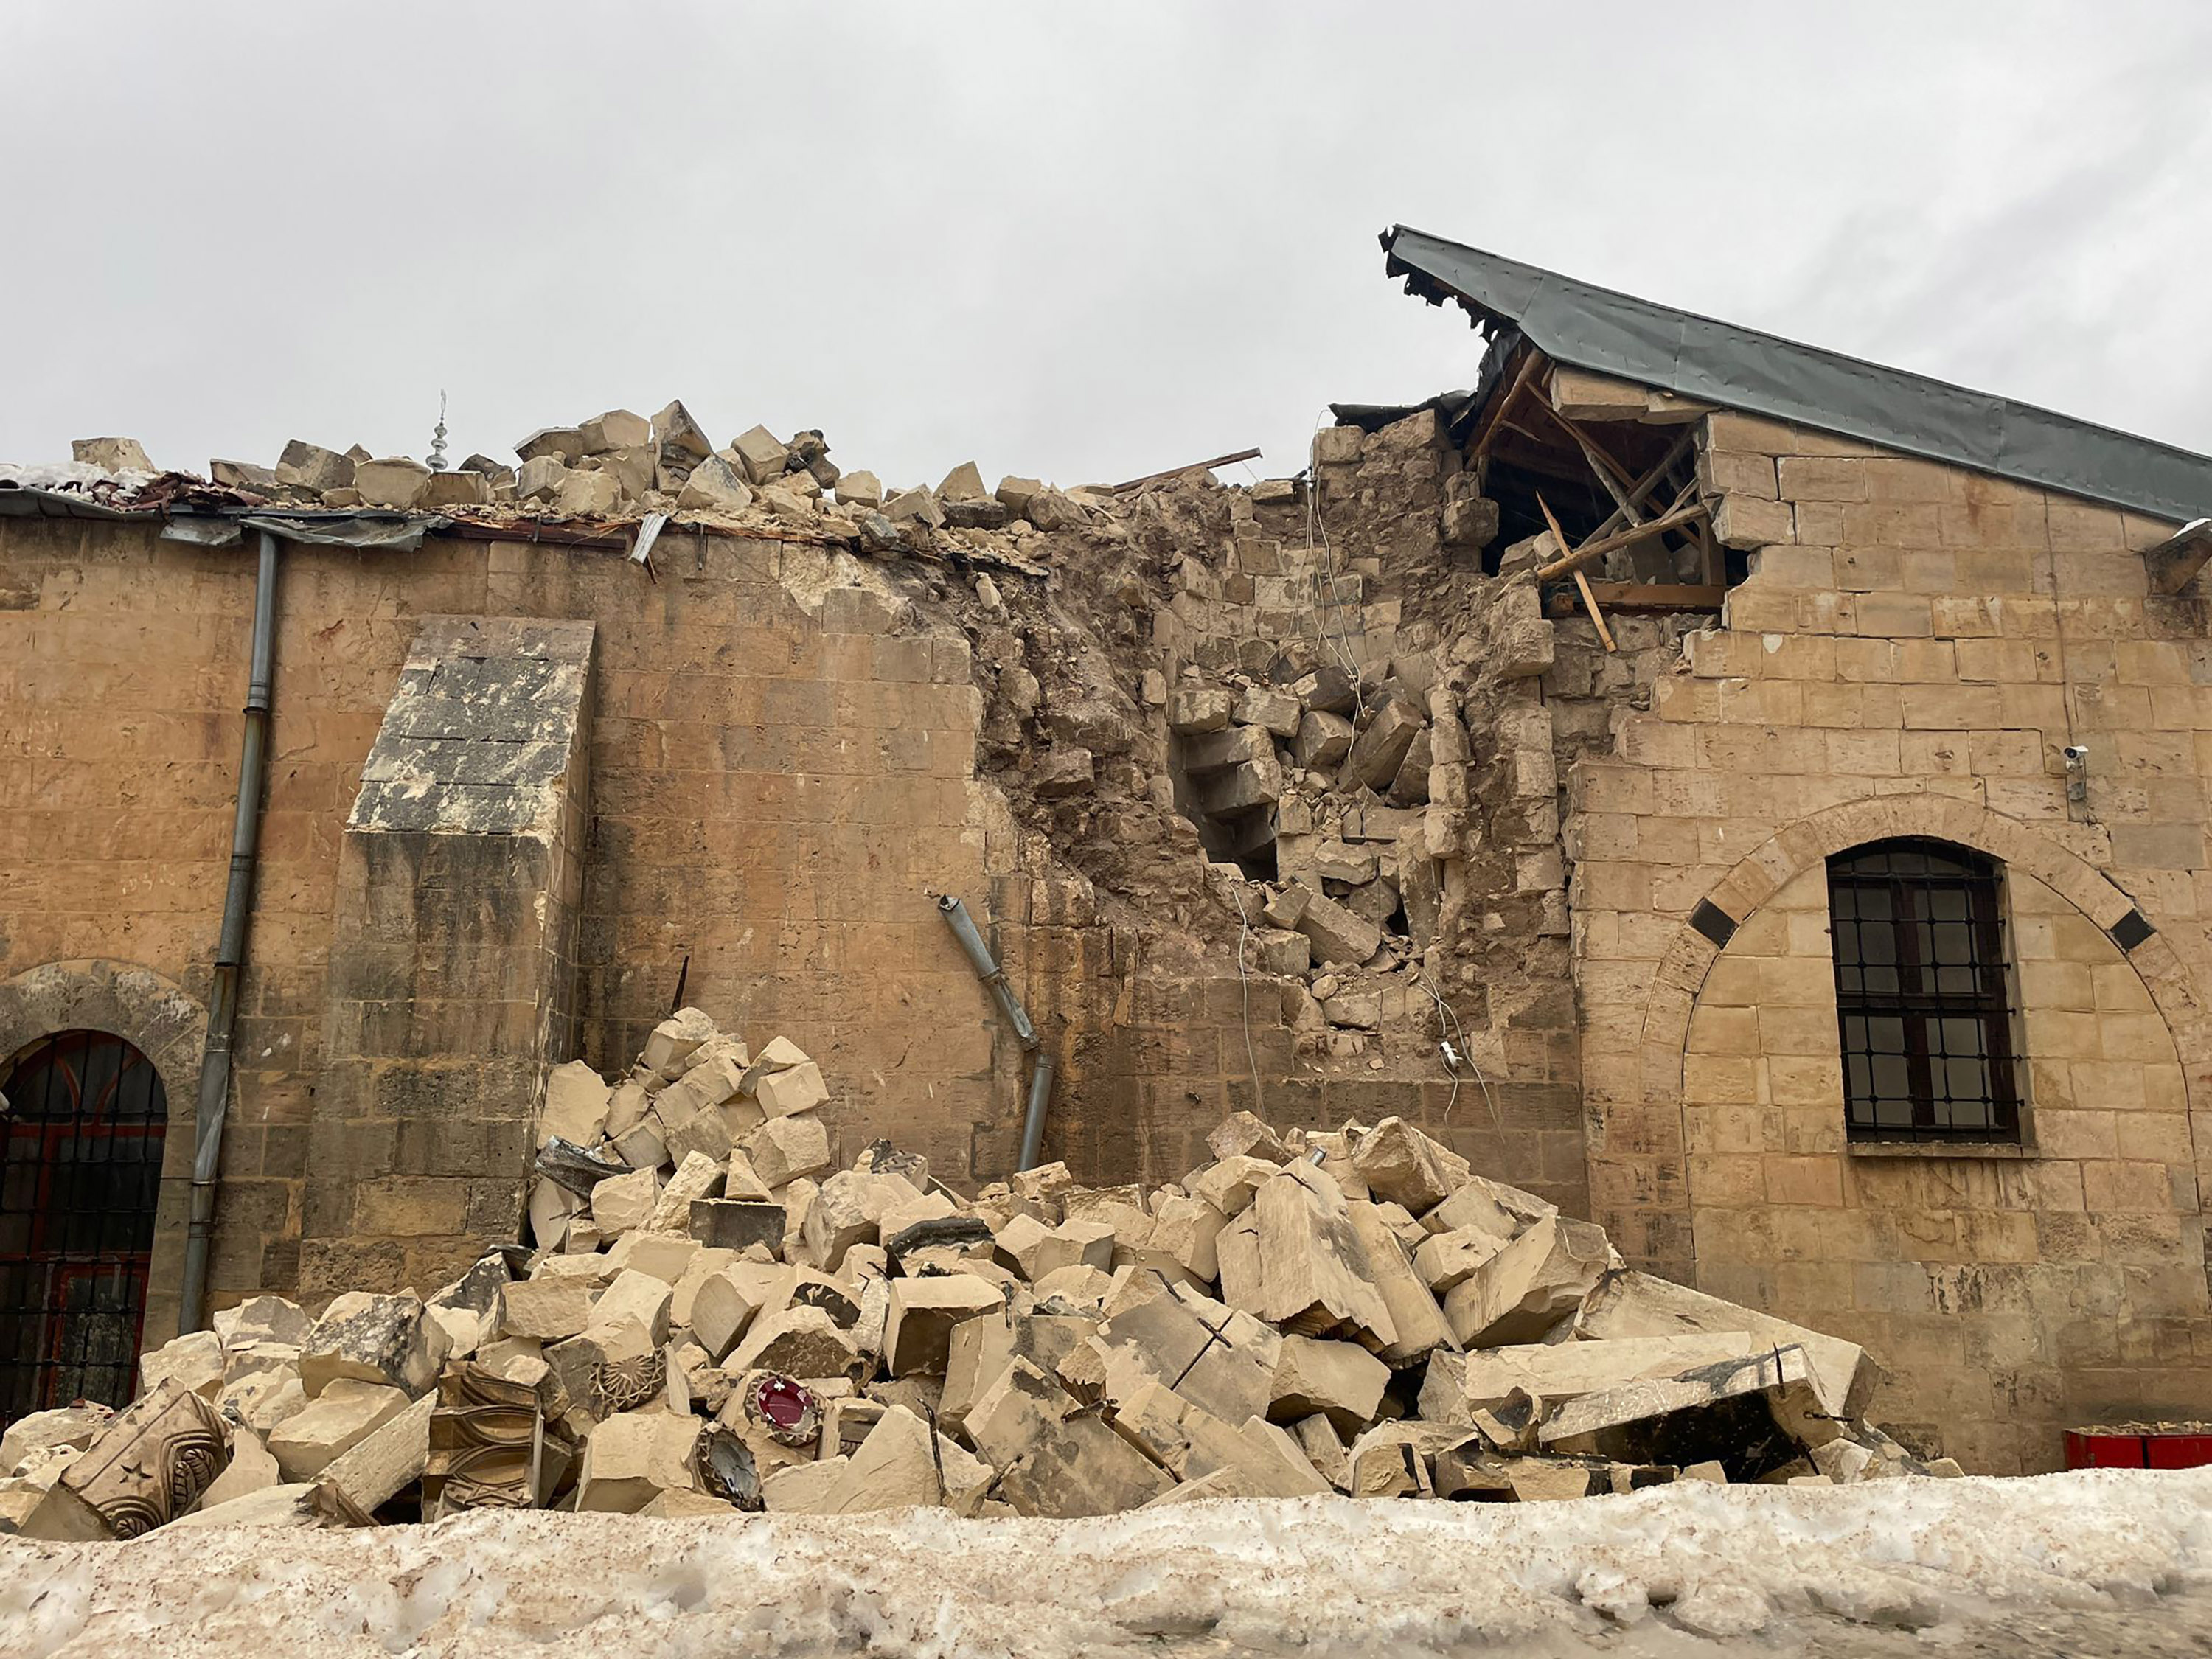 The historical Gaziantep Castle heavily damaged after the earthquake on February 6.